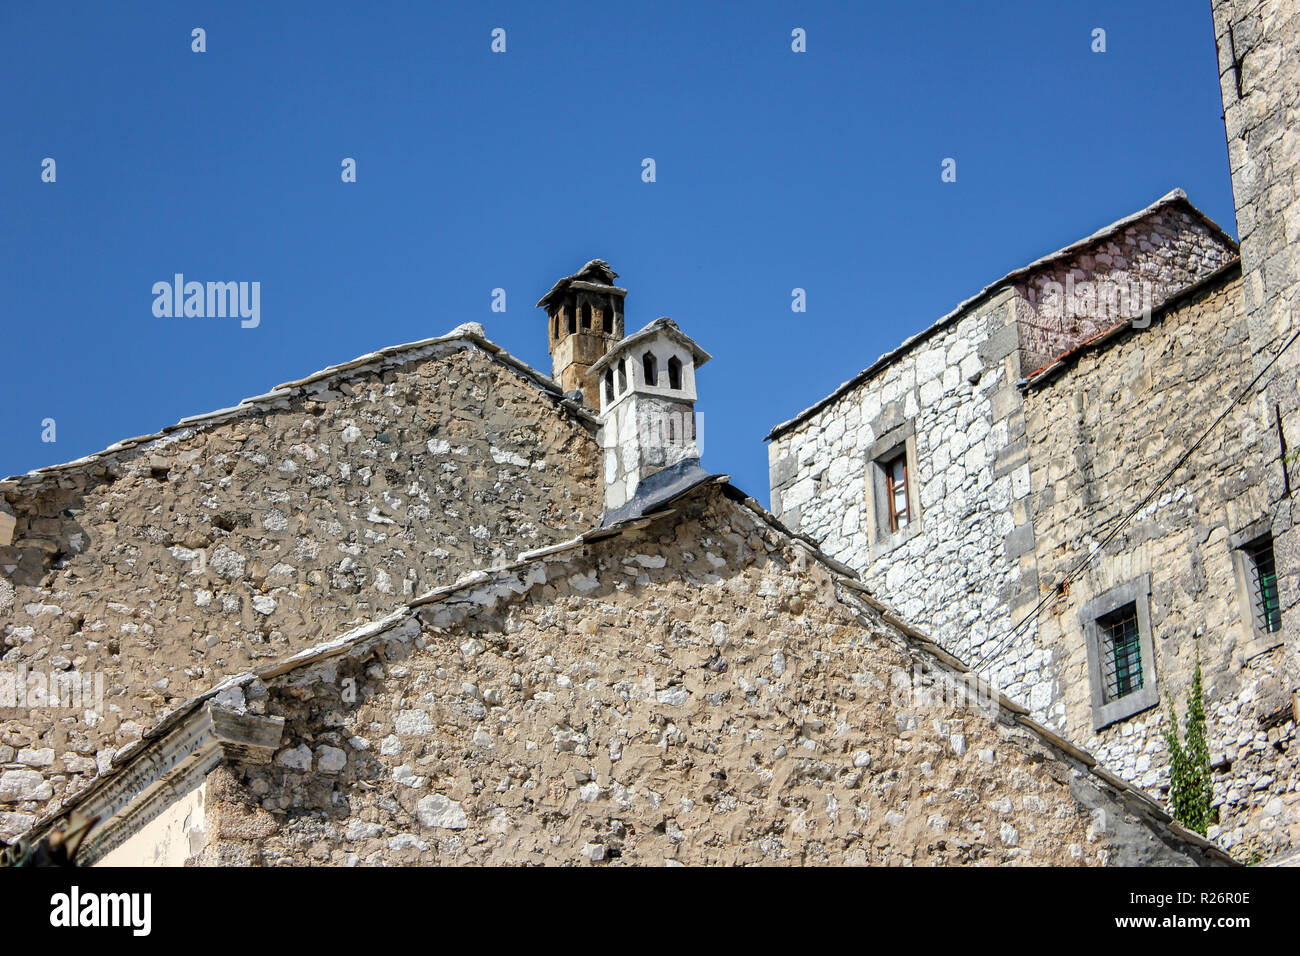 August 2013, Mostar.  Typical stone gable end and chimeny pots in the historical old town. Stock Photo